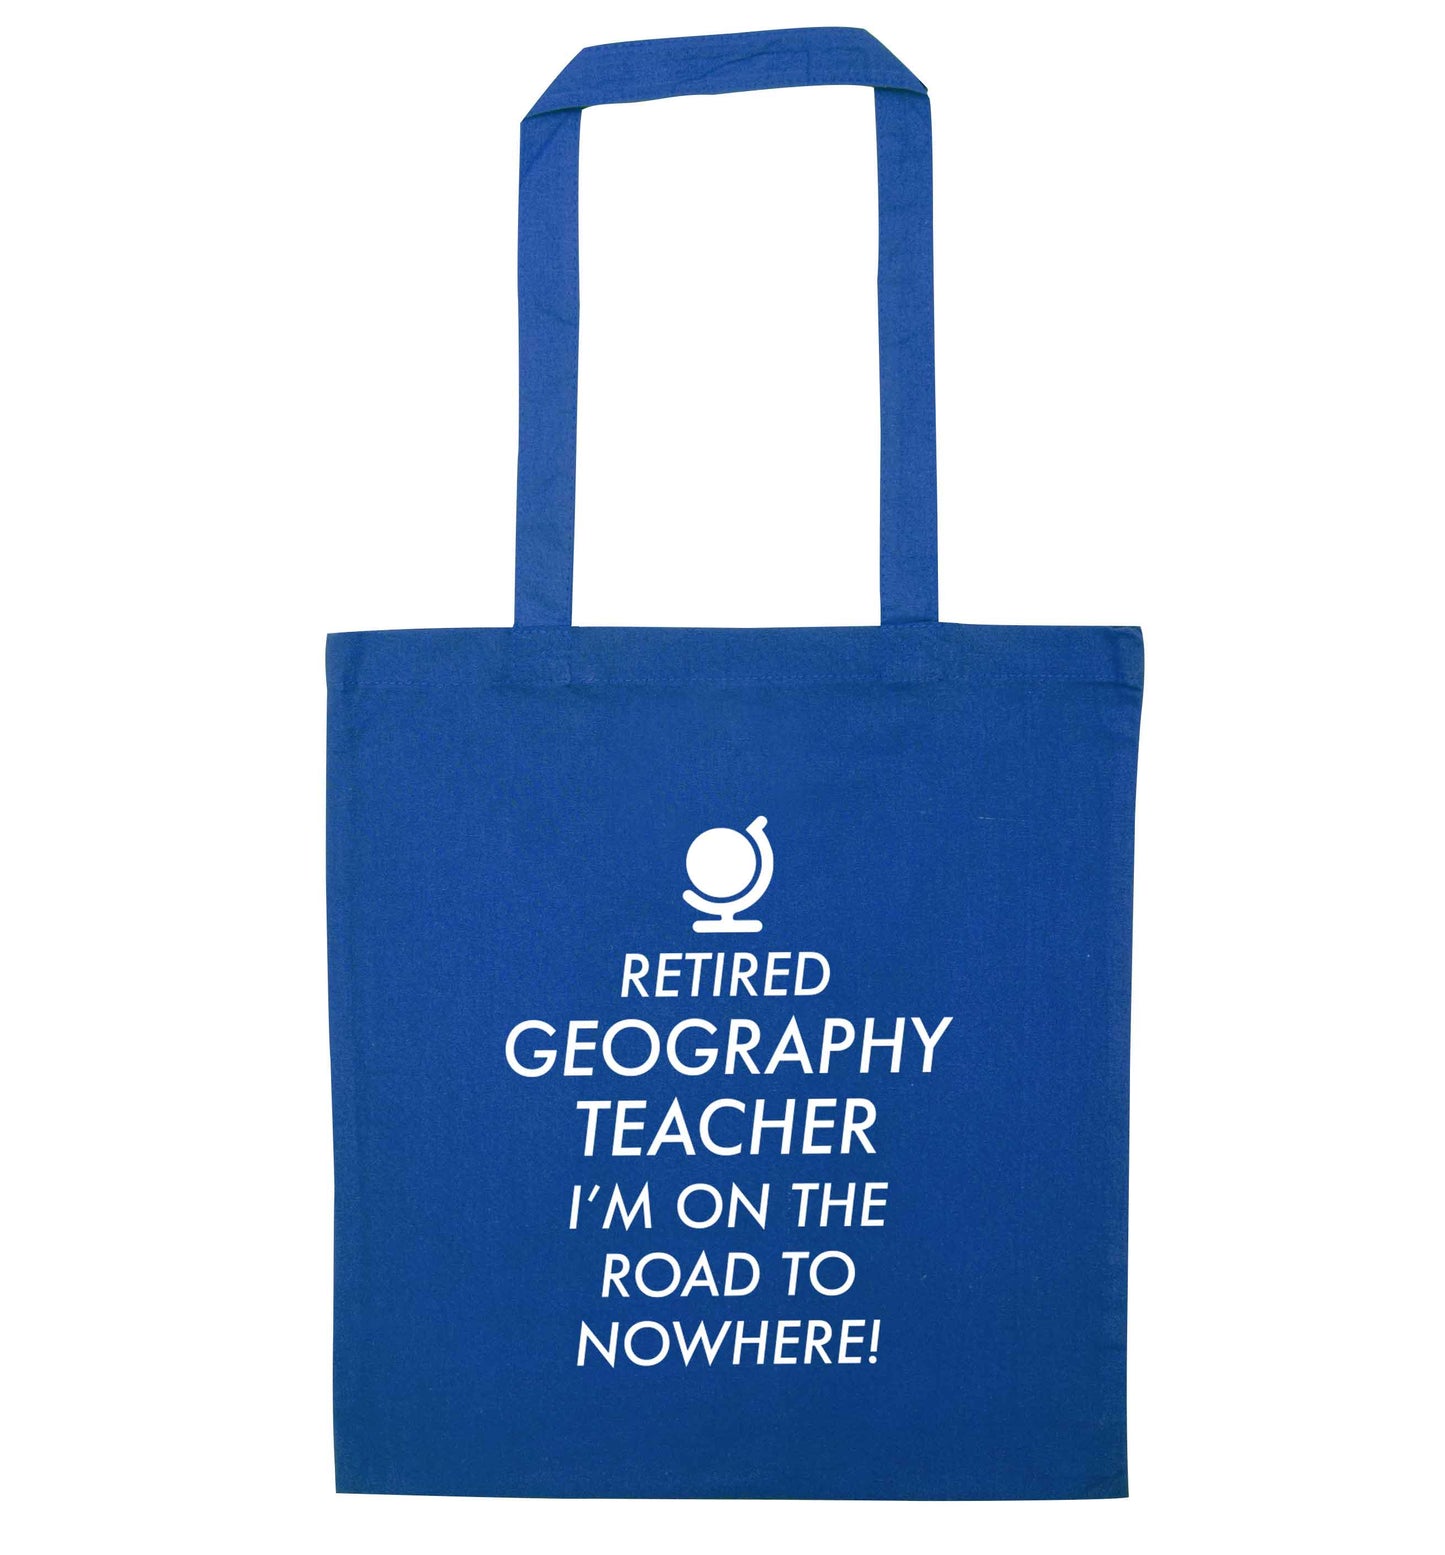 Retired geography teacher I'm on the road to nowhere blue tote bag